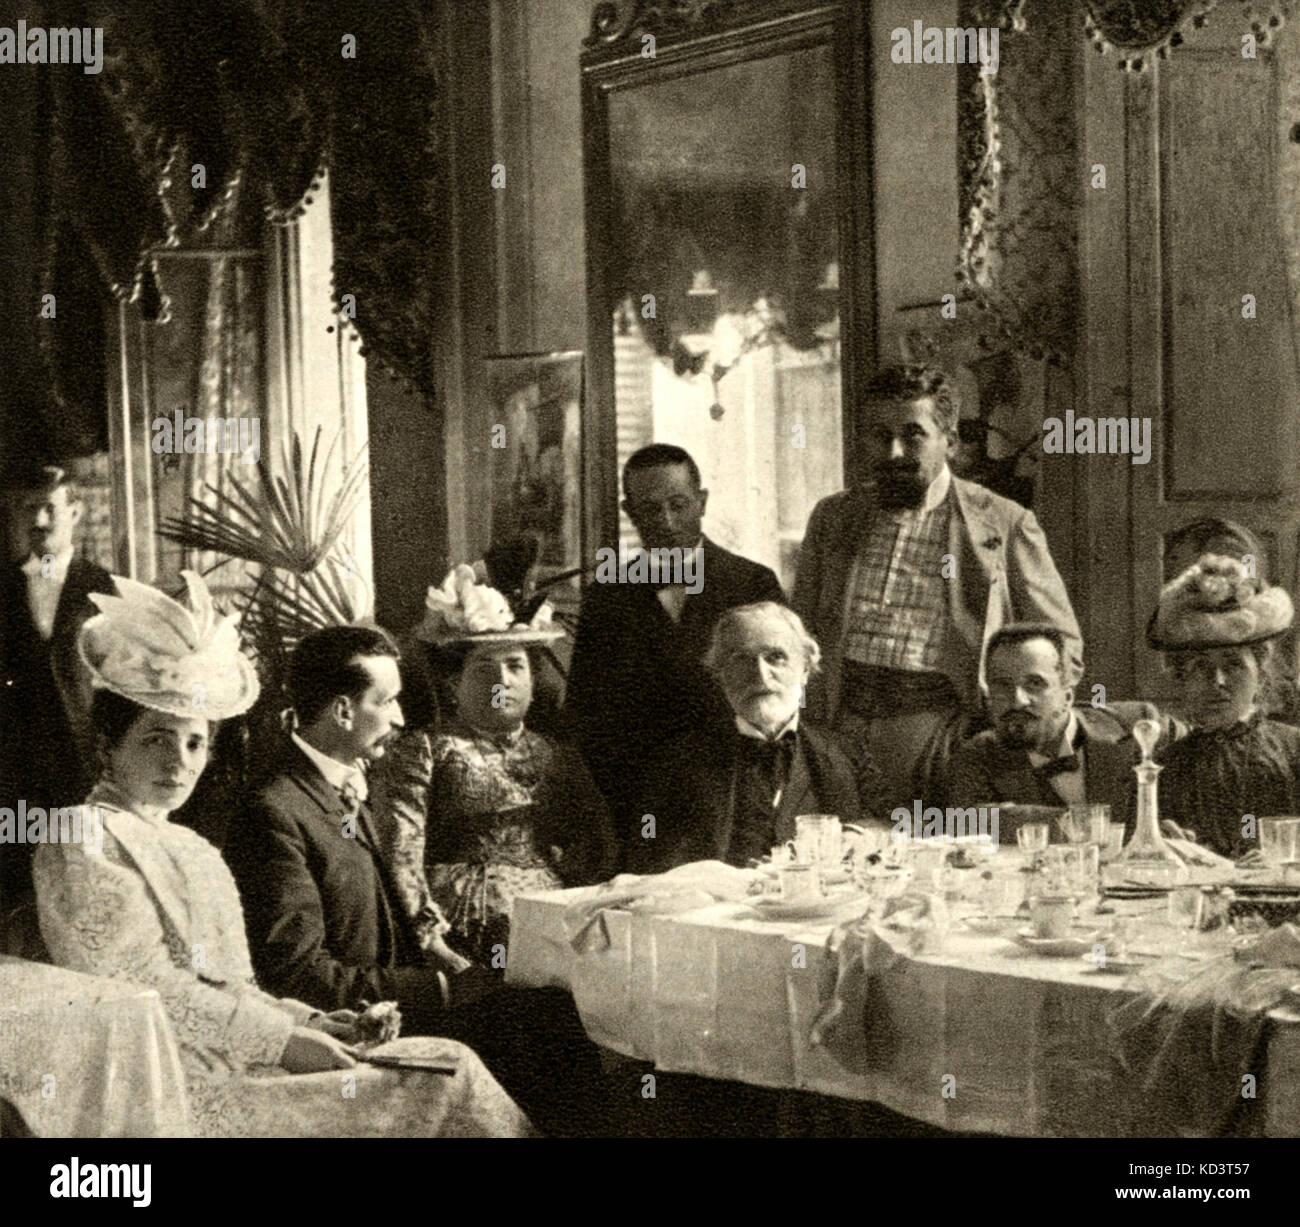 VERDI, seated at the table,  from left to right are Teresa Stolz, Prof. Grocco, Giuseppina Pasqua, Leopoldo Mugnone and his wife.  Italian composer (1813-1901). Stock Photo